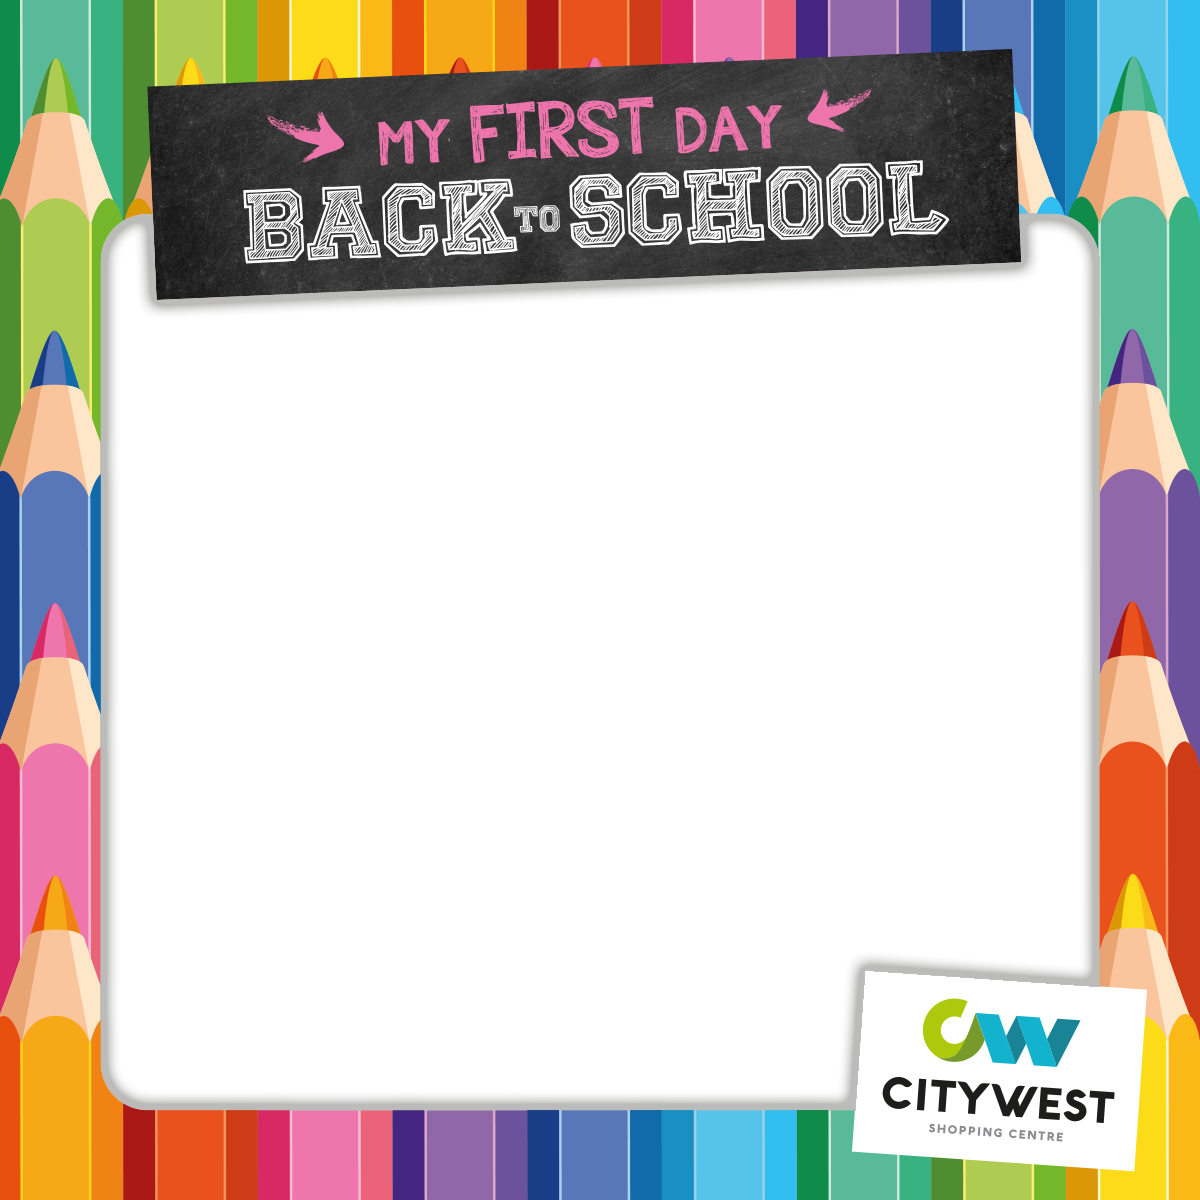 Back to School at Citywest Shopping Centre!